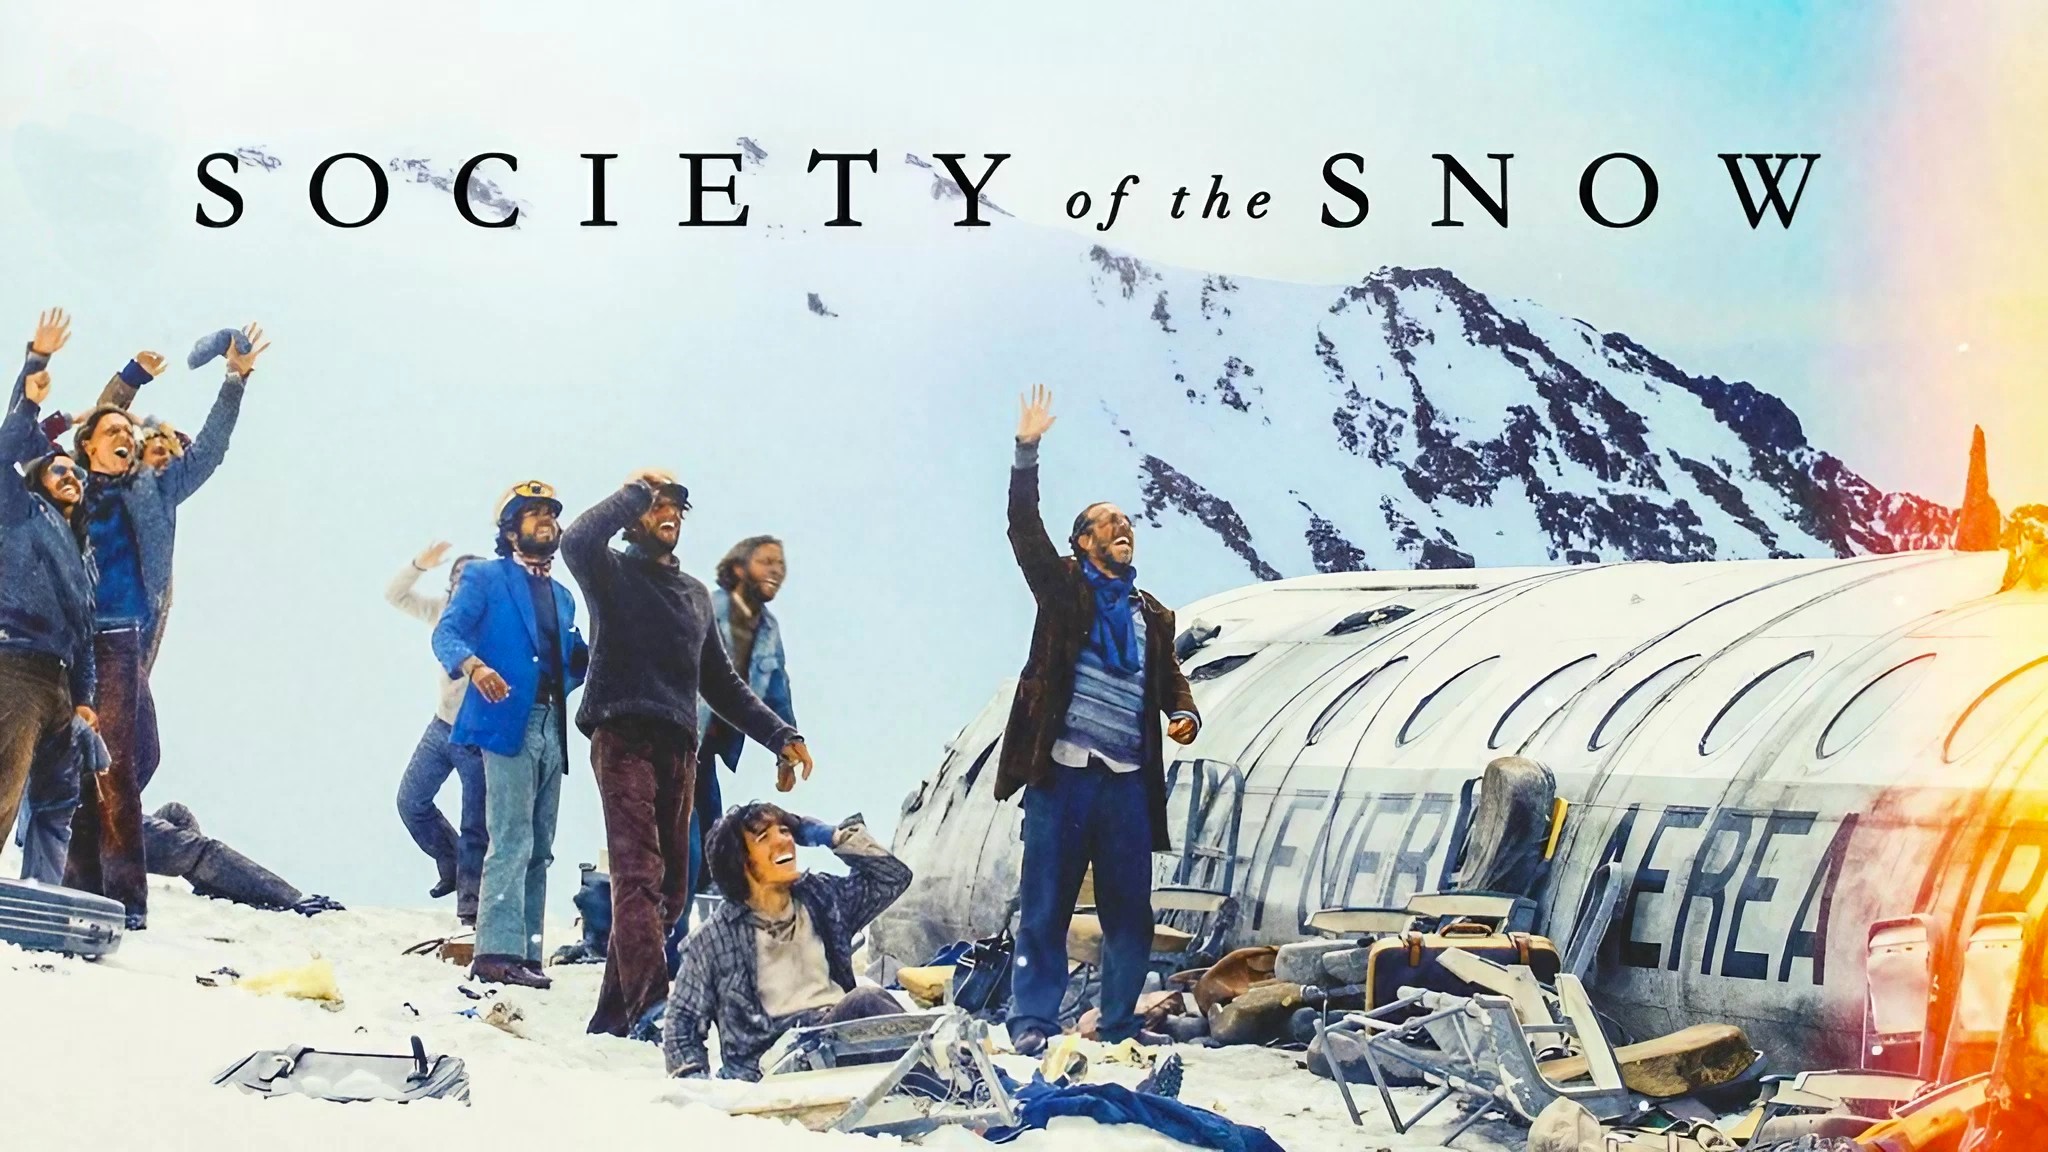 Is Society Of The Snow Based On A True Story?